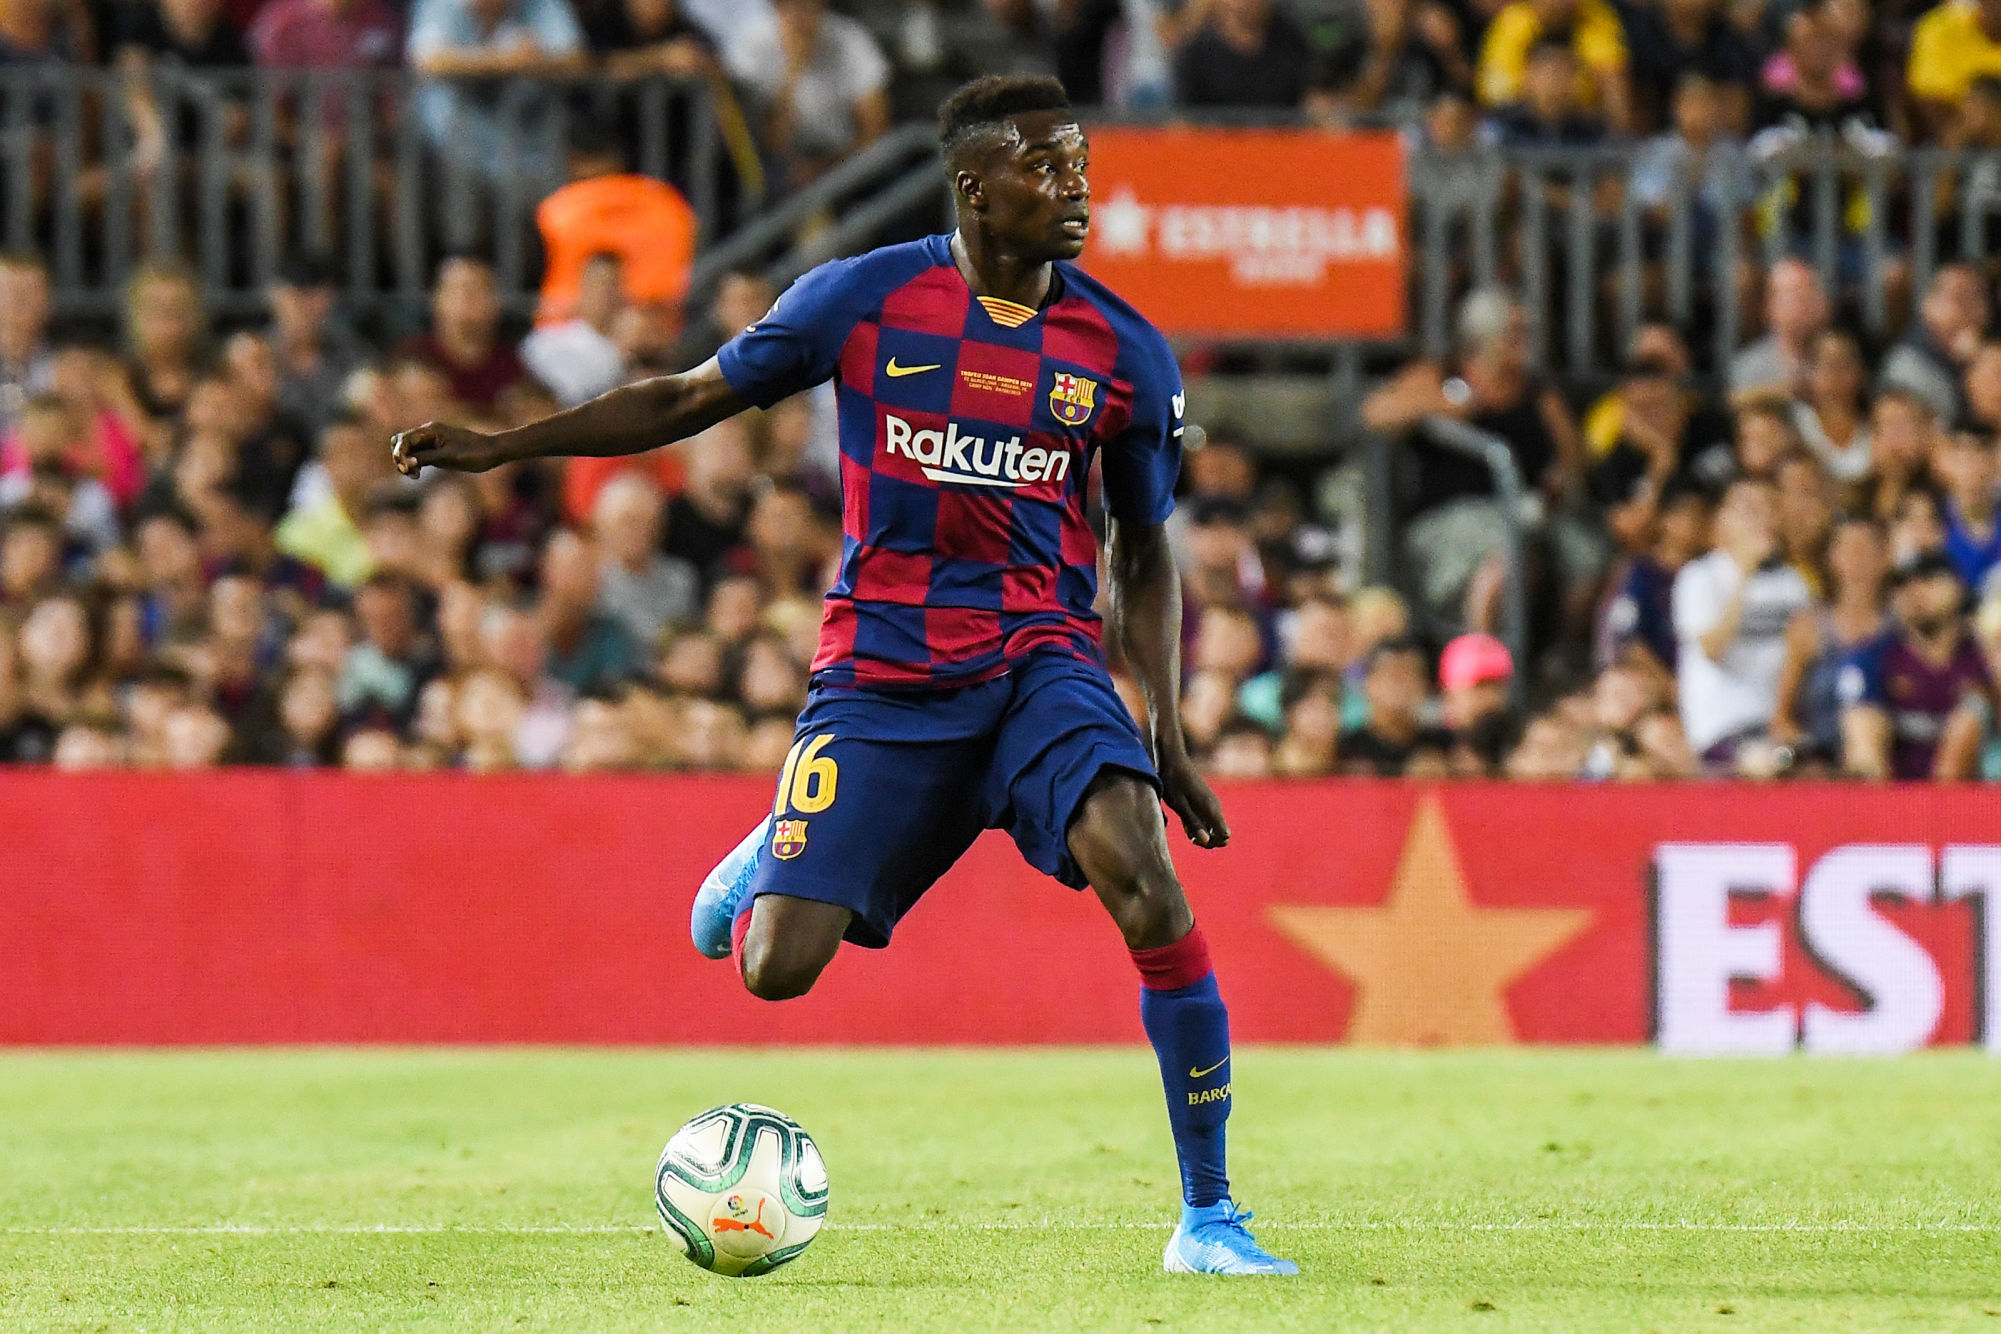 Moussa Wague of FC Barcelona during the Trofeu Joan Gamper match between FC Barcelona and Arsenal FC at the Camp Nou stadium on August 04, 2019 in Barcelona, Spain .
Photo : SUSA / Icon Sport